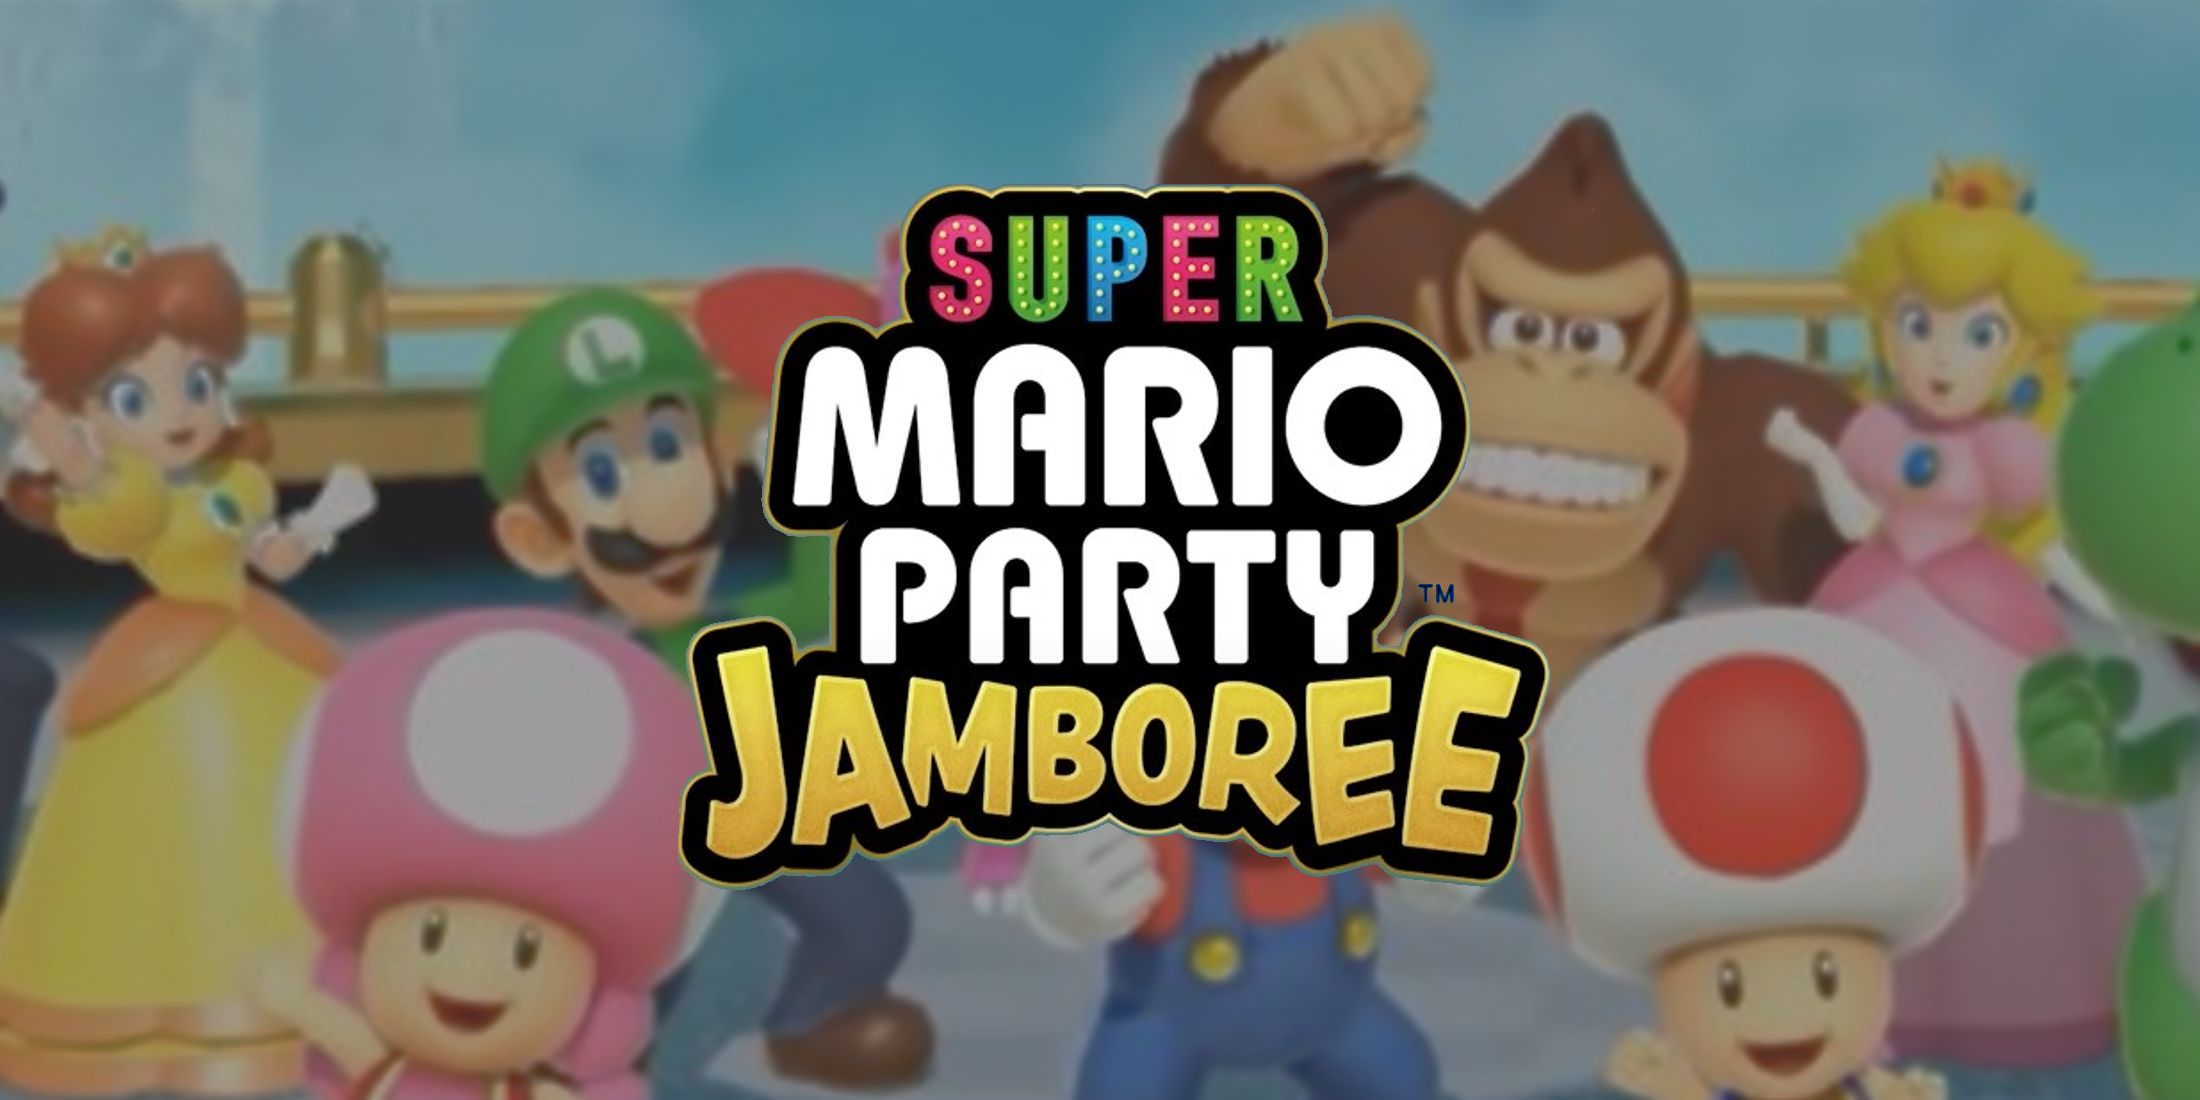 Super Mario Party Jamboree Announcement NIntendo Direct 2024 Character Roster with Logo edit 2